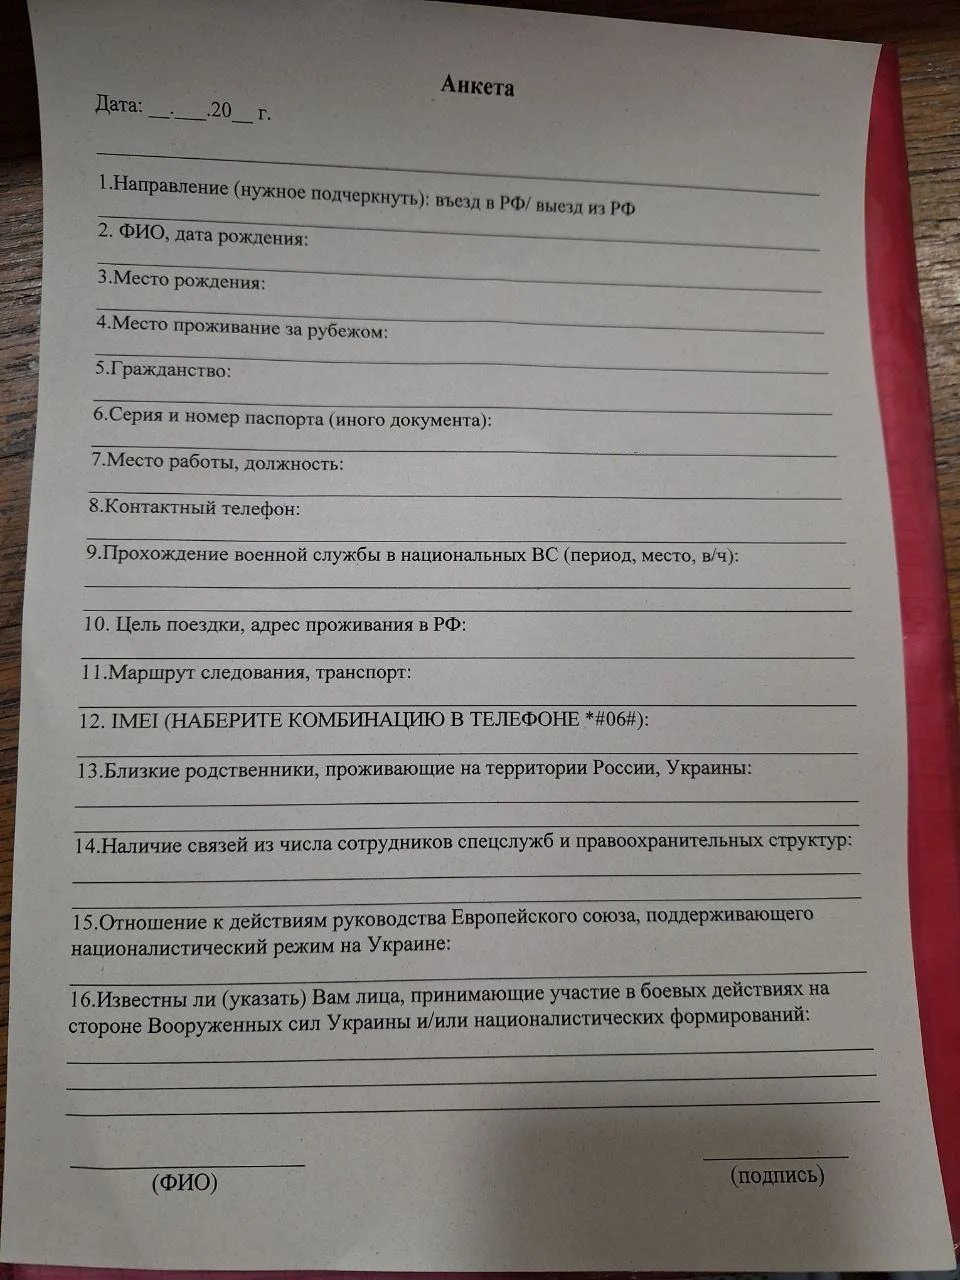 Question#15 is about the traveller’s attitude towards the EU “which supports the nationalist regime in Ukraine”. Photo: Mediazona